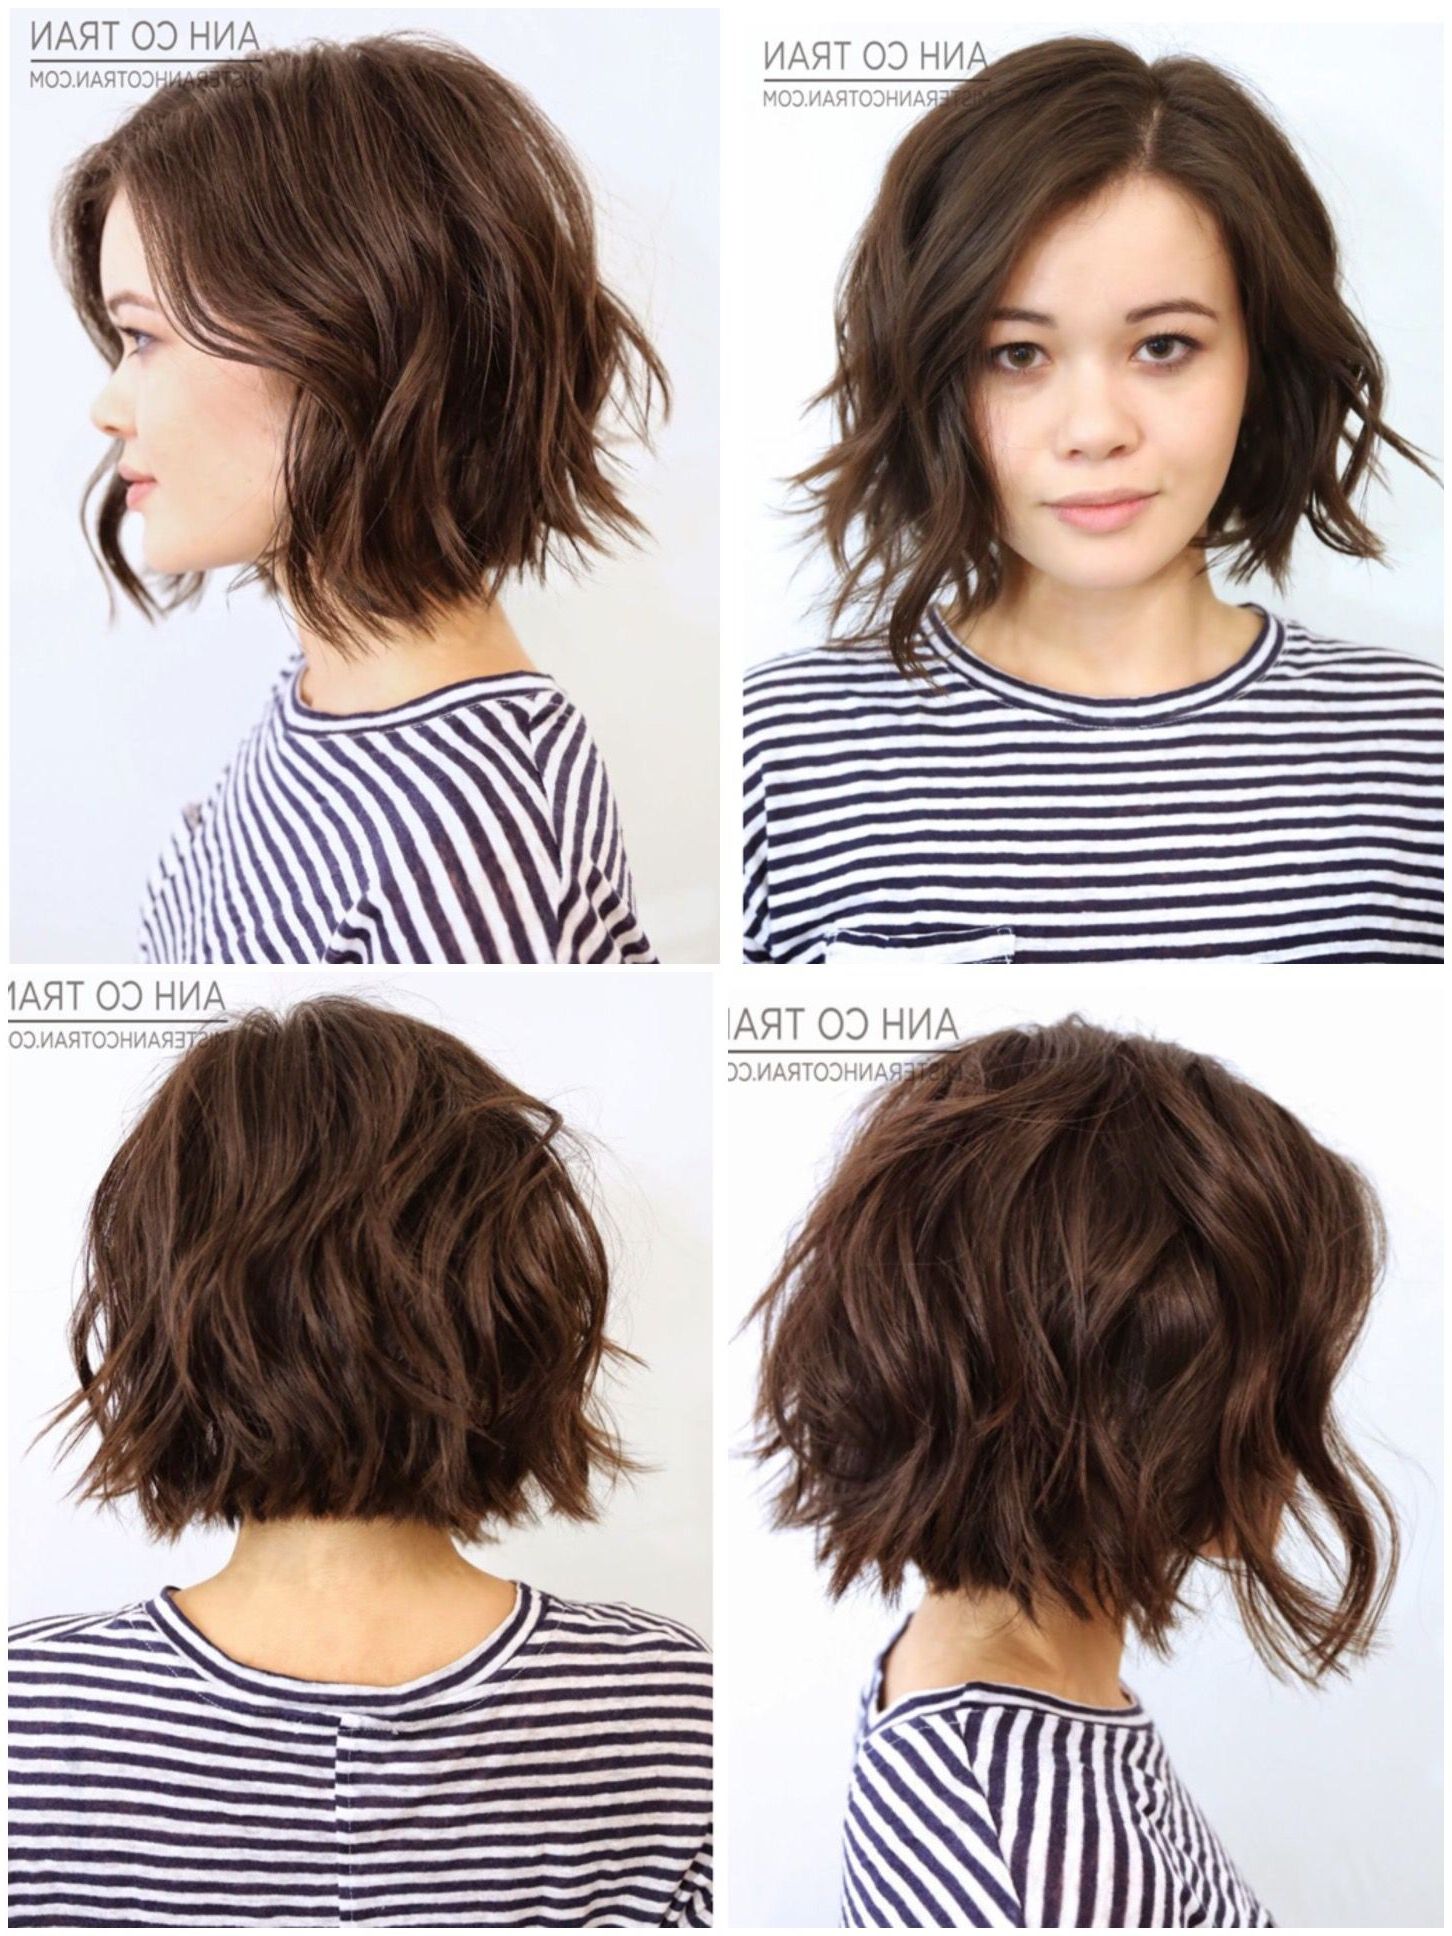 360 View Of Great Classic Bob Gone Messy | Short Layered Pertaining To Curly Messy Bob Hairstyles With Side Bangs (View 5 of 20)